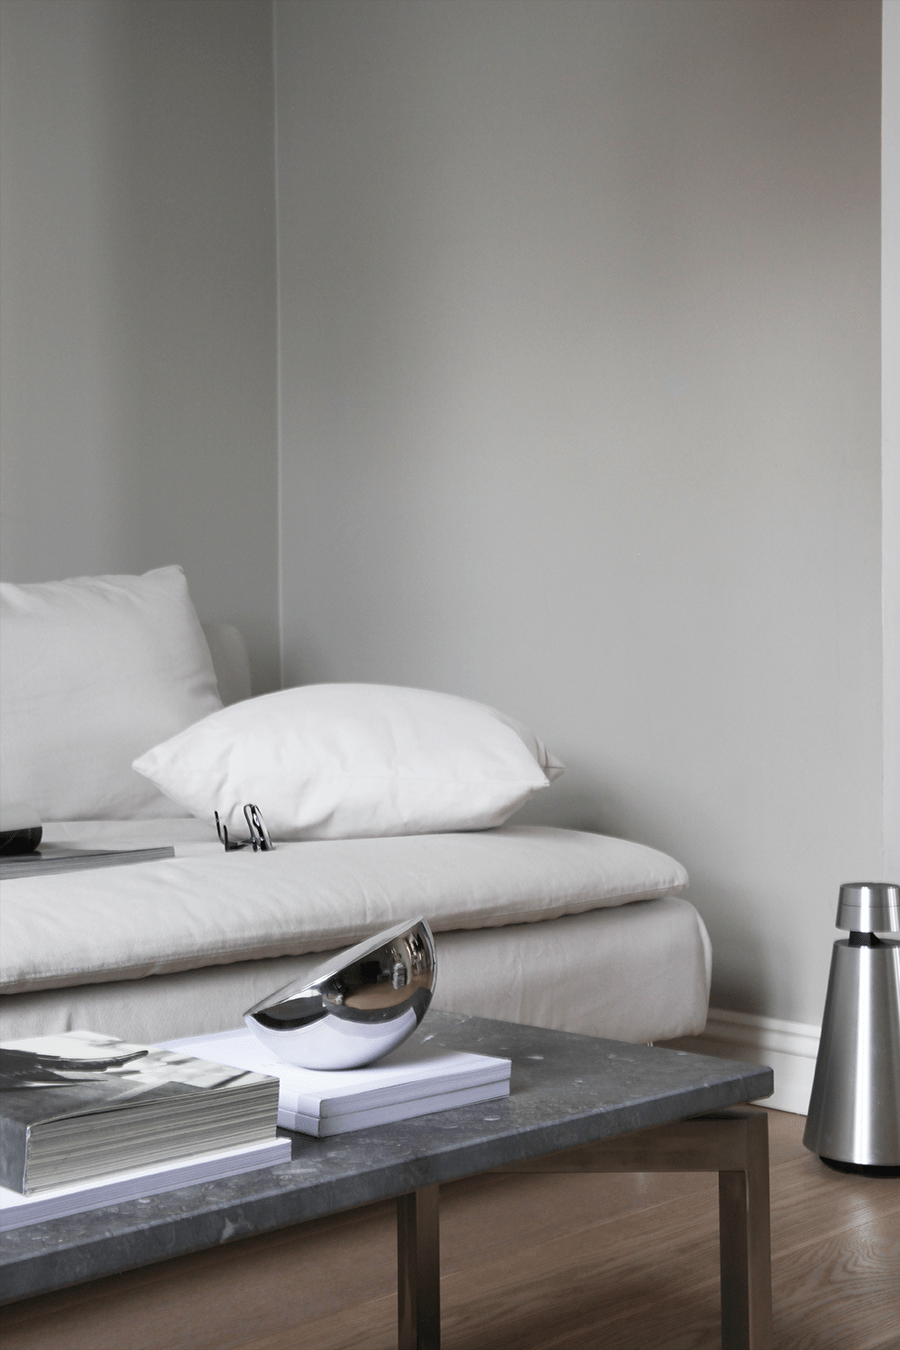 HOW TO STYLE YOUR SIDE TABLE WITH A FEW SELECTED OBJECTS